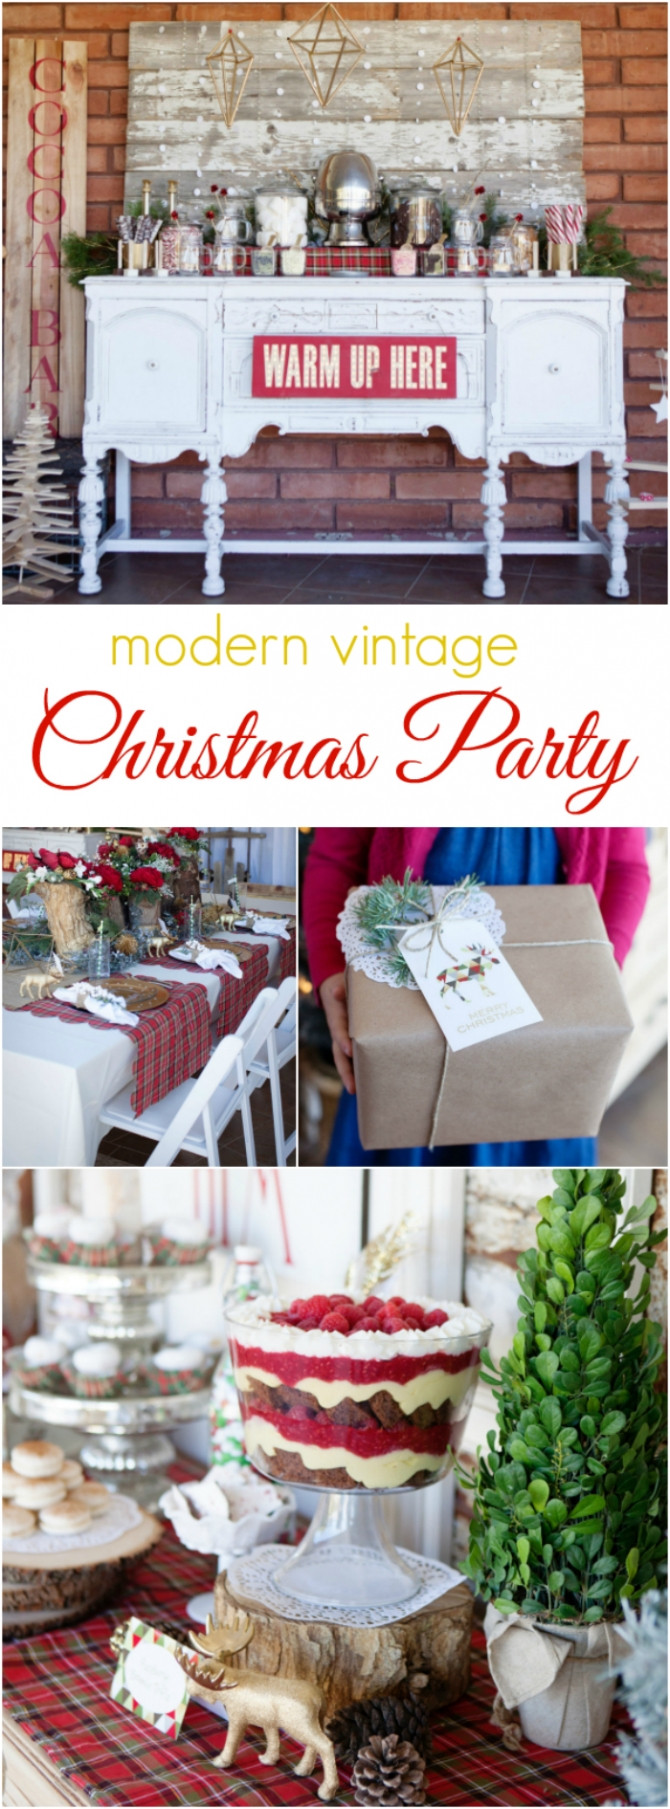 Vintage Christmas Party Ideas
 modern vintage Christmas themed party Lolly Jane